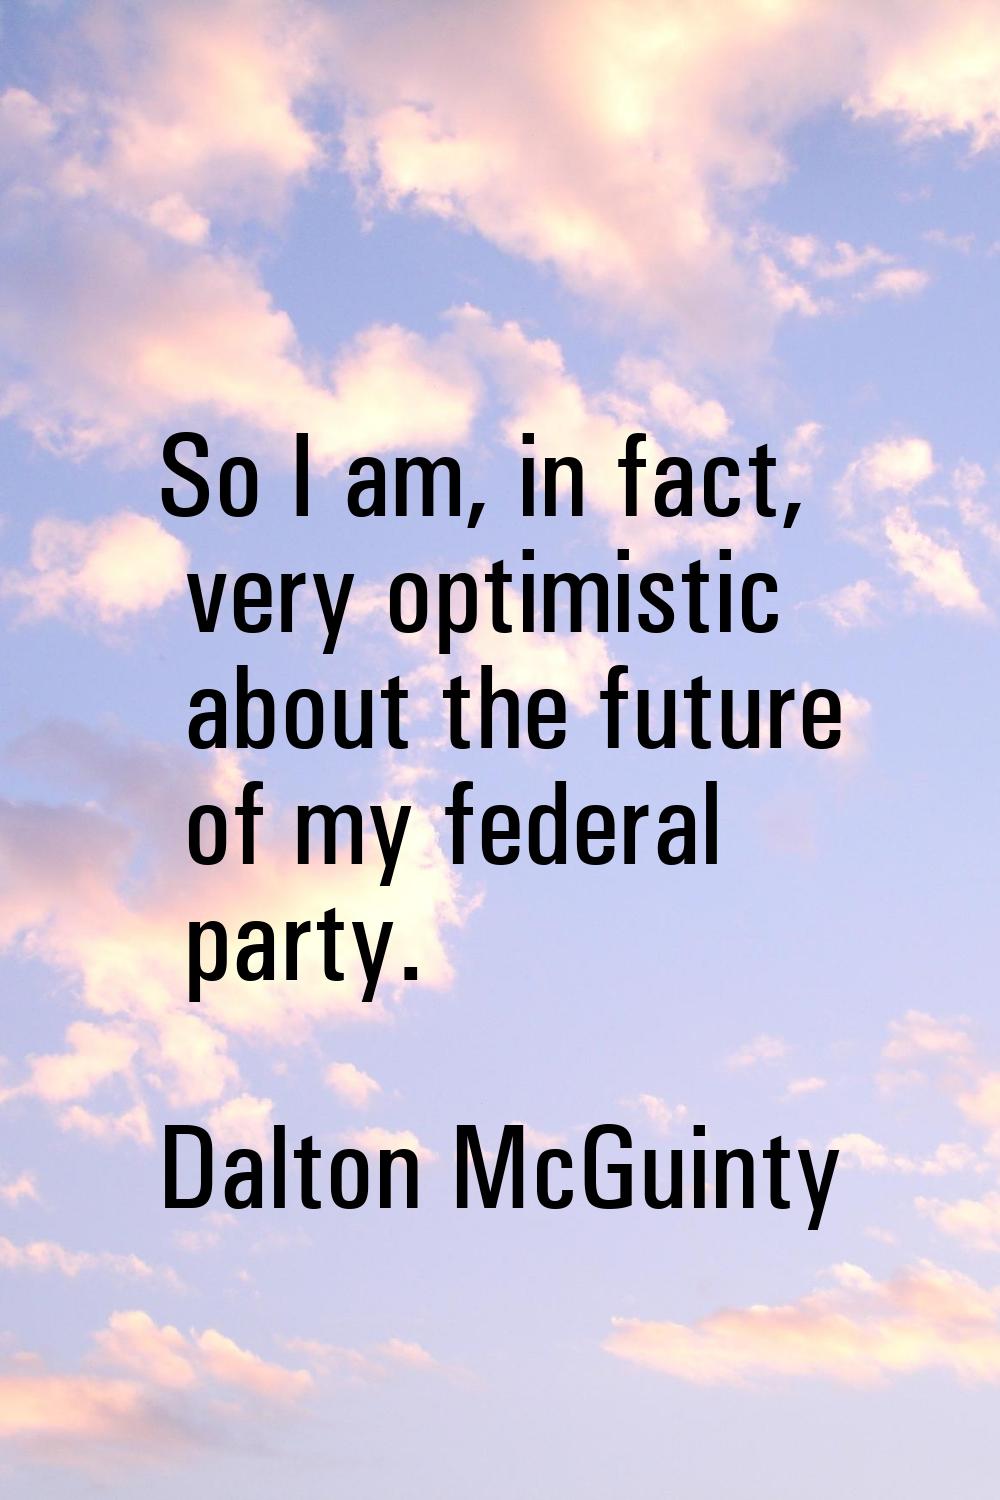 So I am, in fact, very optimistic about the future of my federal party.